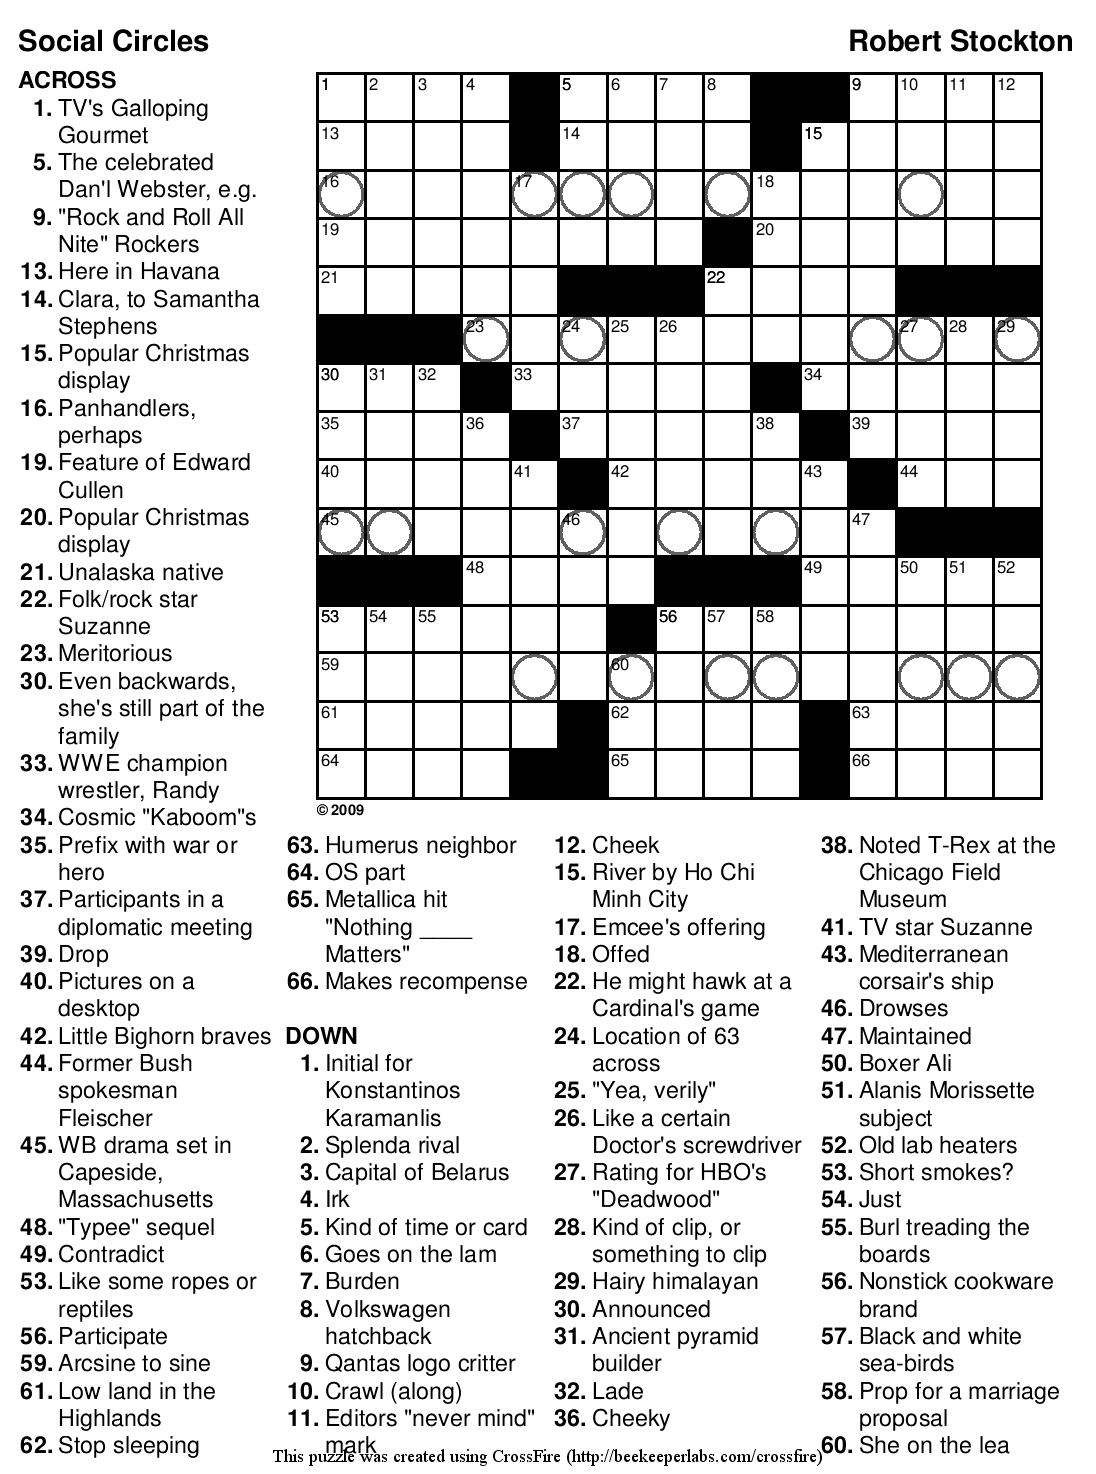 Crossword Puzzles Printable - Yahoo Image Search Results | Crossword - Printable Crosswords.net